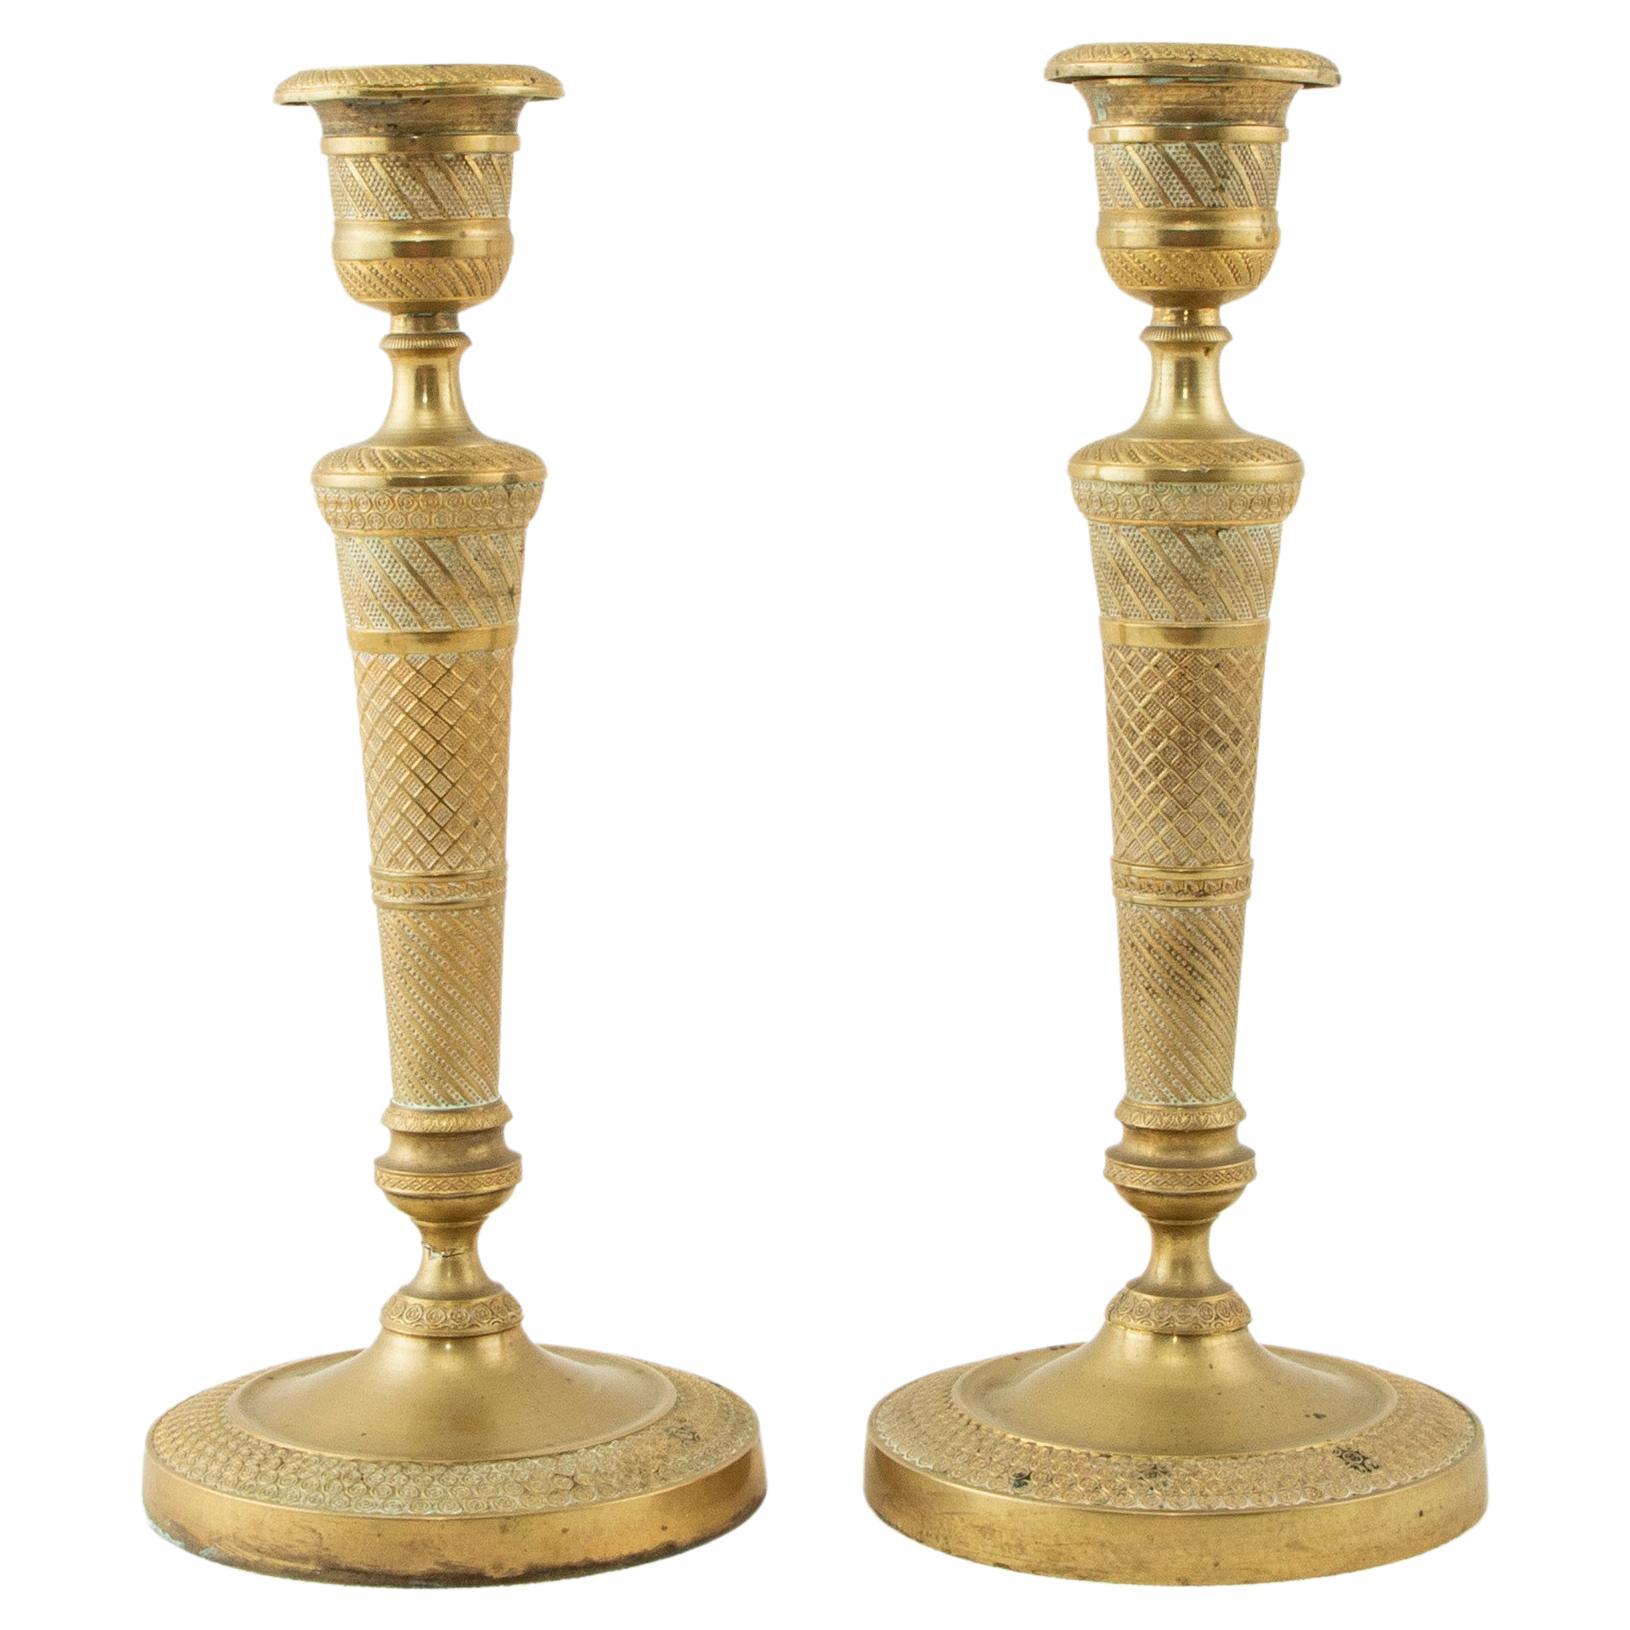 Pair of Early 19th Century French Restauration Period Bronze Candlesticks